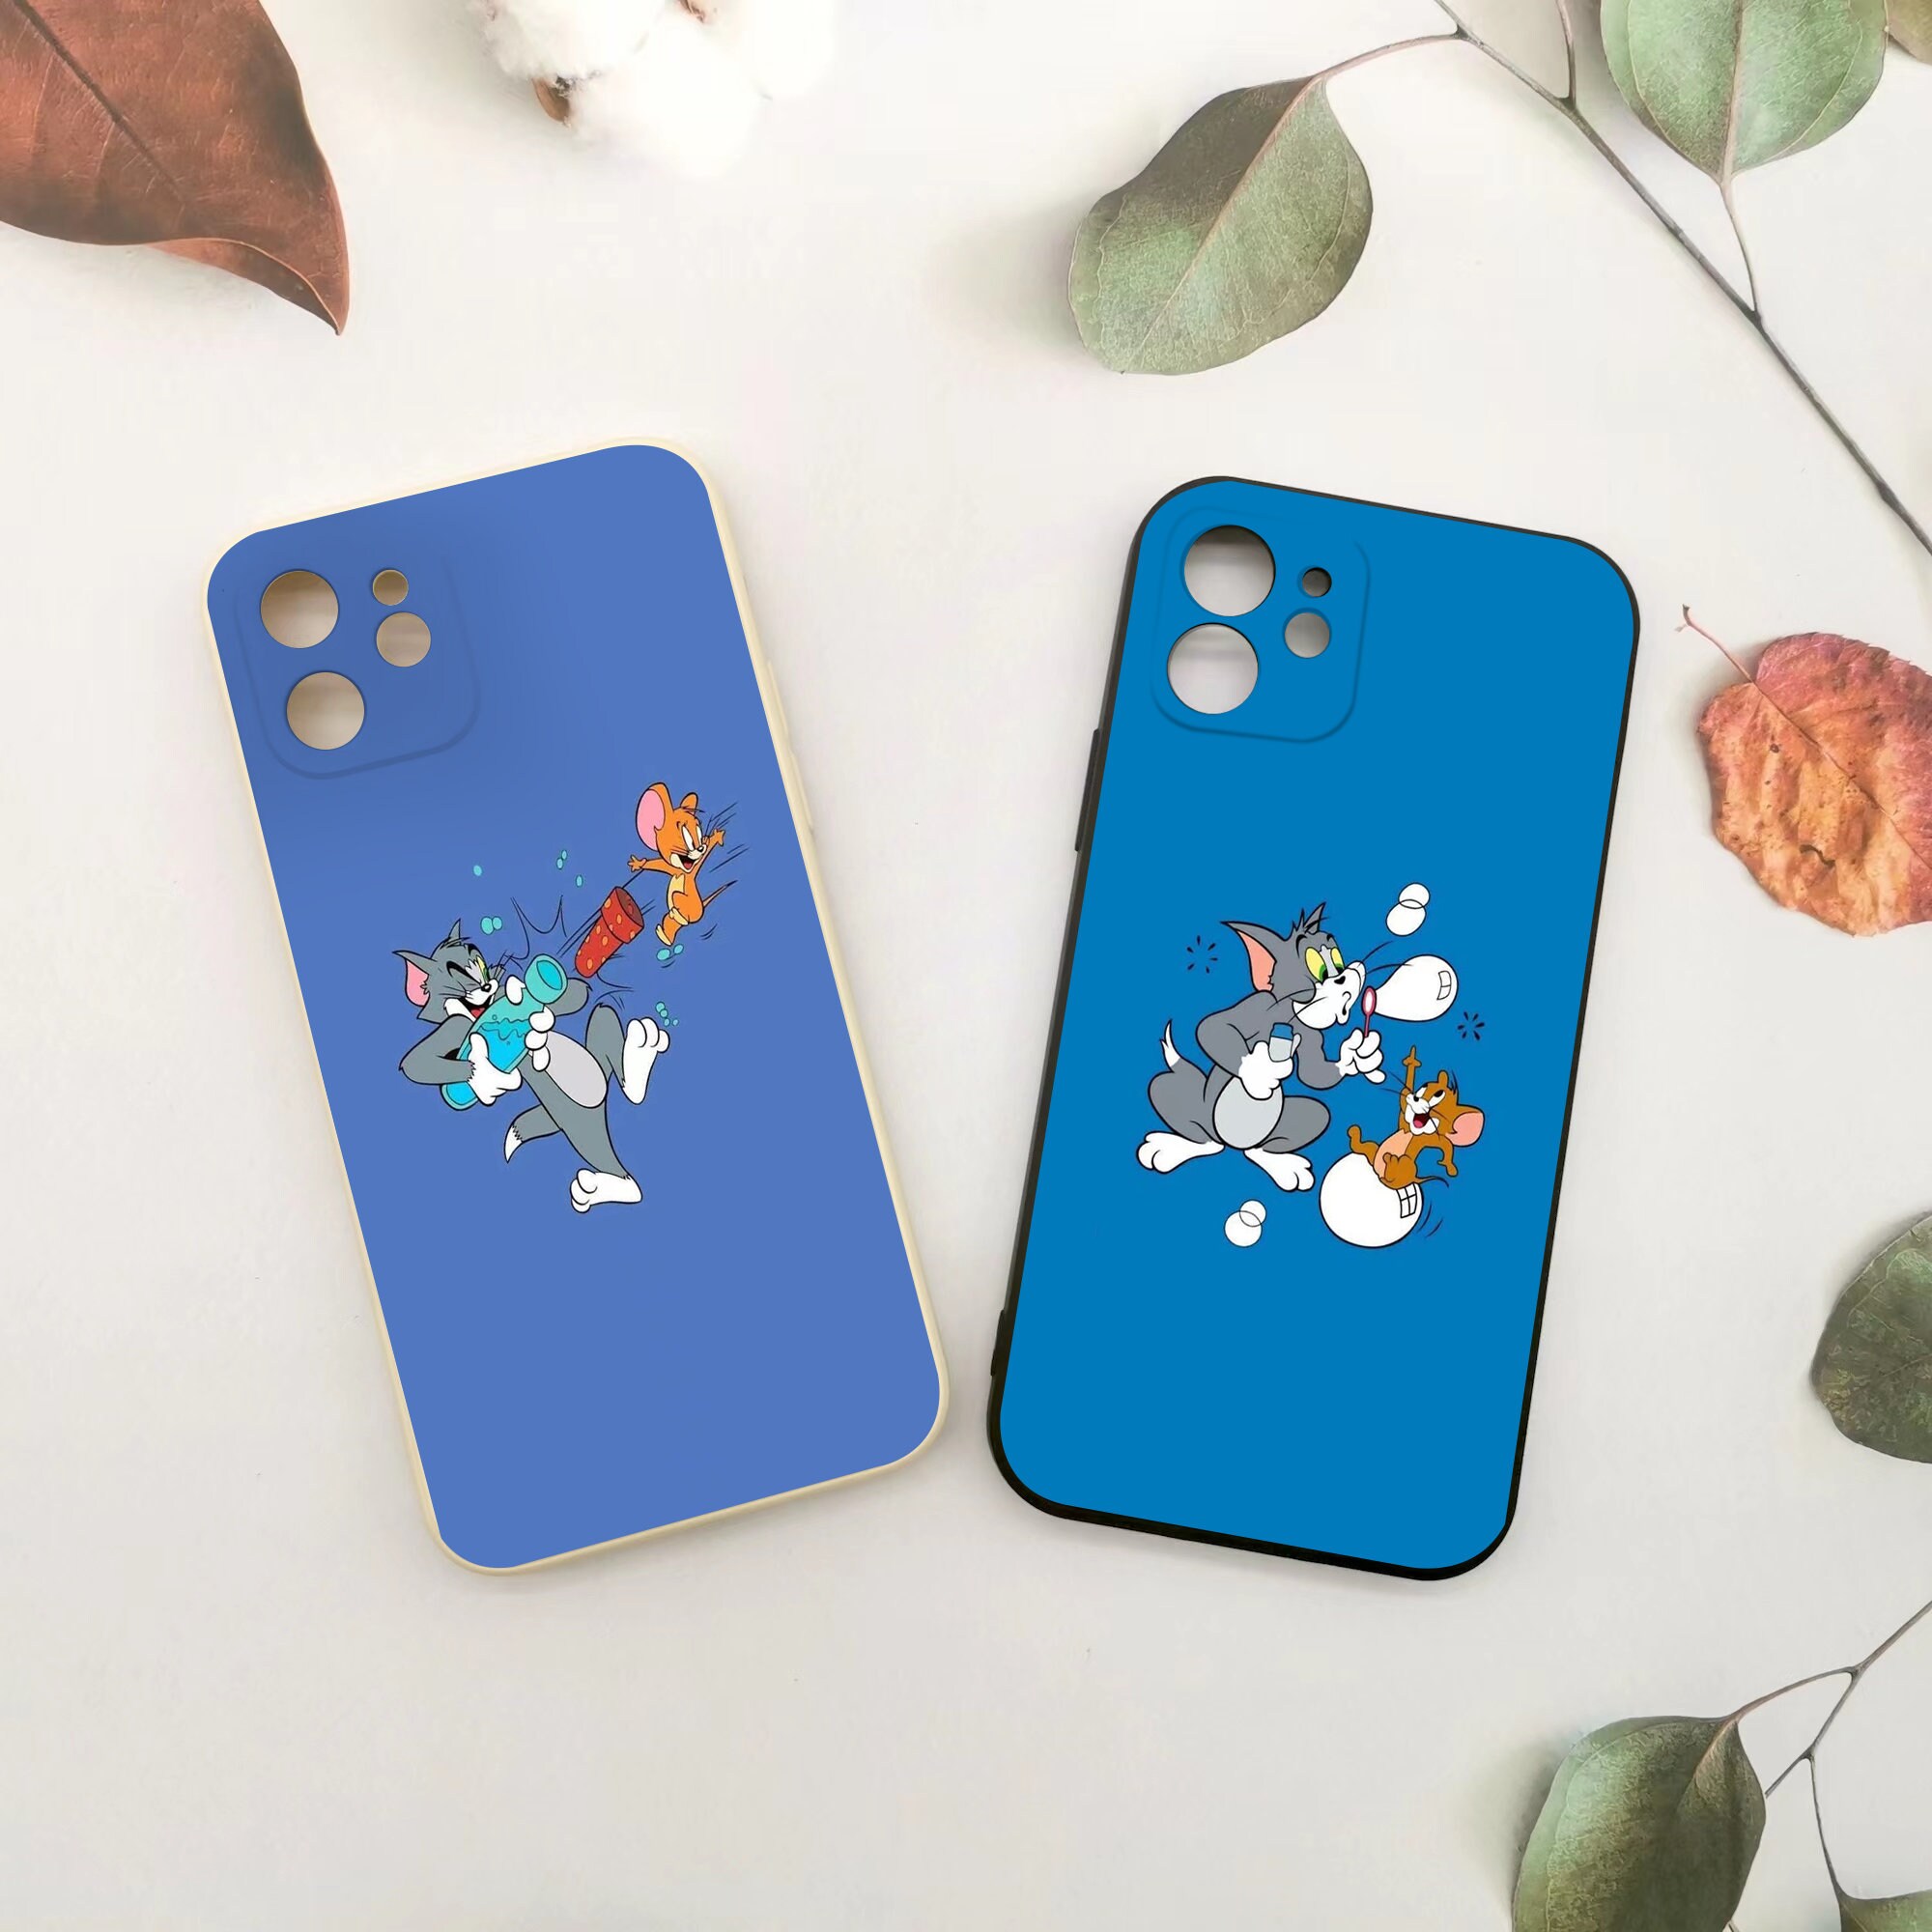 Cartoon cute Tom and Jerry couple Phone Case Cover For iPhone 13/12/11 Pro Max, Xs, 7, 8